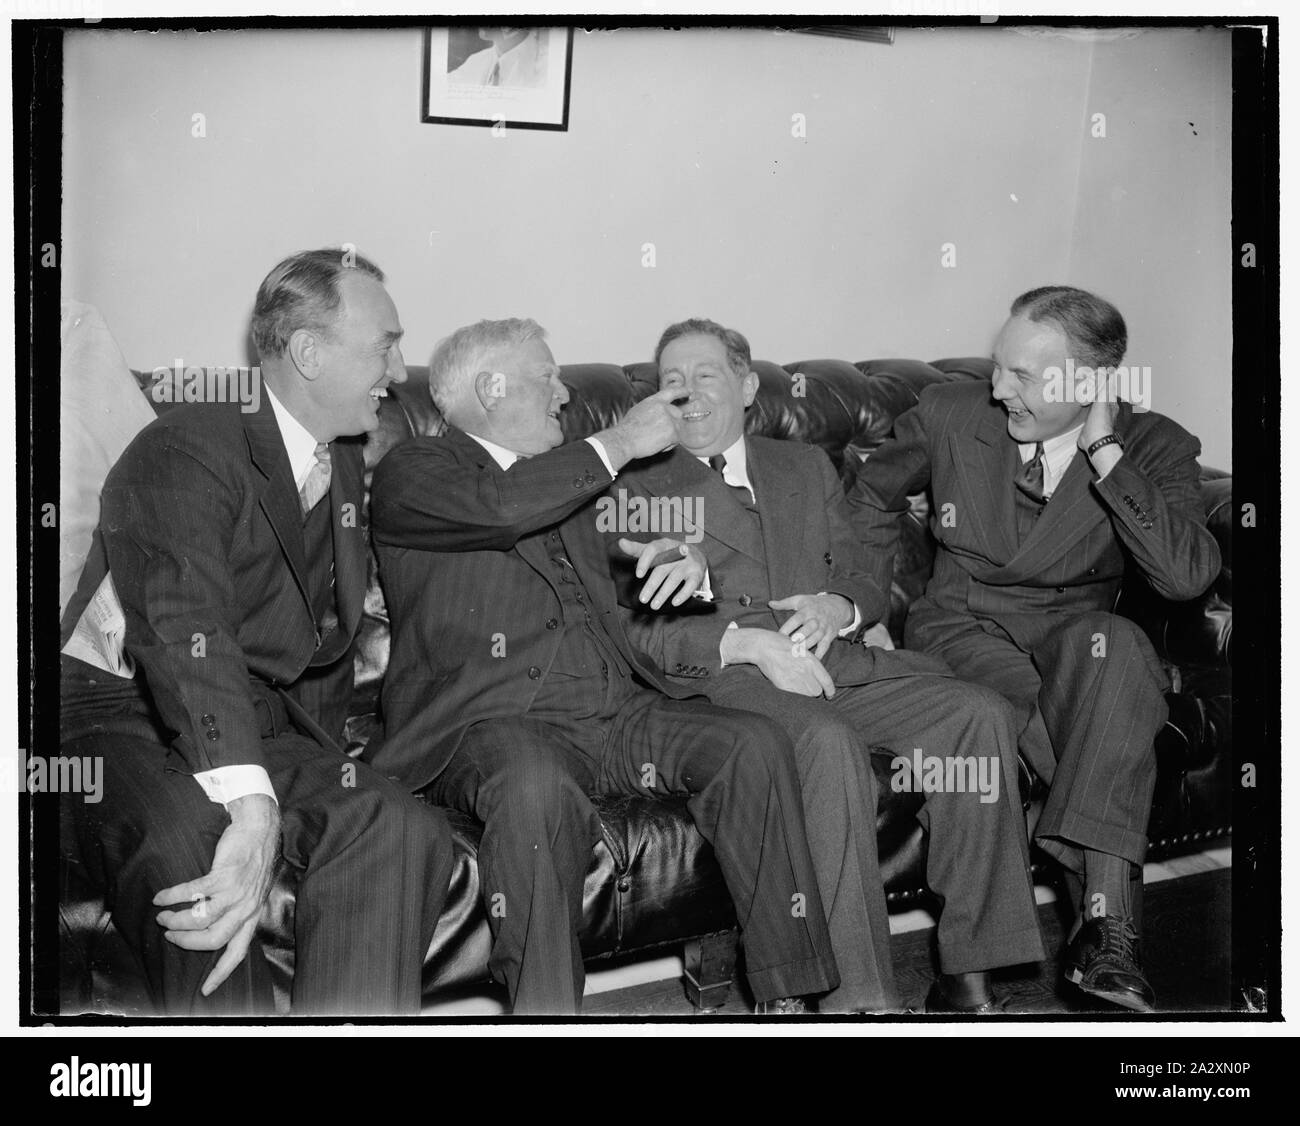 Rookie Senators engage in first 'Bull' session with Vice President Garner. Washington, D.C., Dec. 19. This session's crop of rookie Senators were initiated today at an impromptu conference with Vice President John N. Garner. Naturally they were regaled by the wily Texas Legislator with some of his famous stories. Left to right: Senator James M. Mead, New York; Vice President Garner, Senator Sheridan Downey, California; and Senator D. Worth Clark, Idaho, 12/19/38 Stock Photo